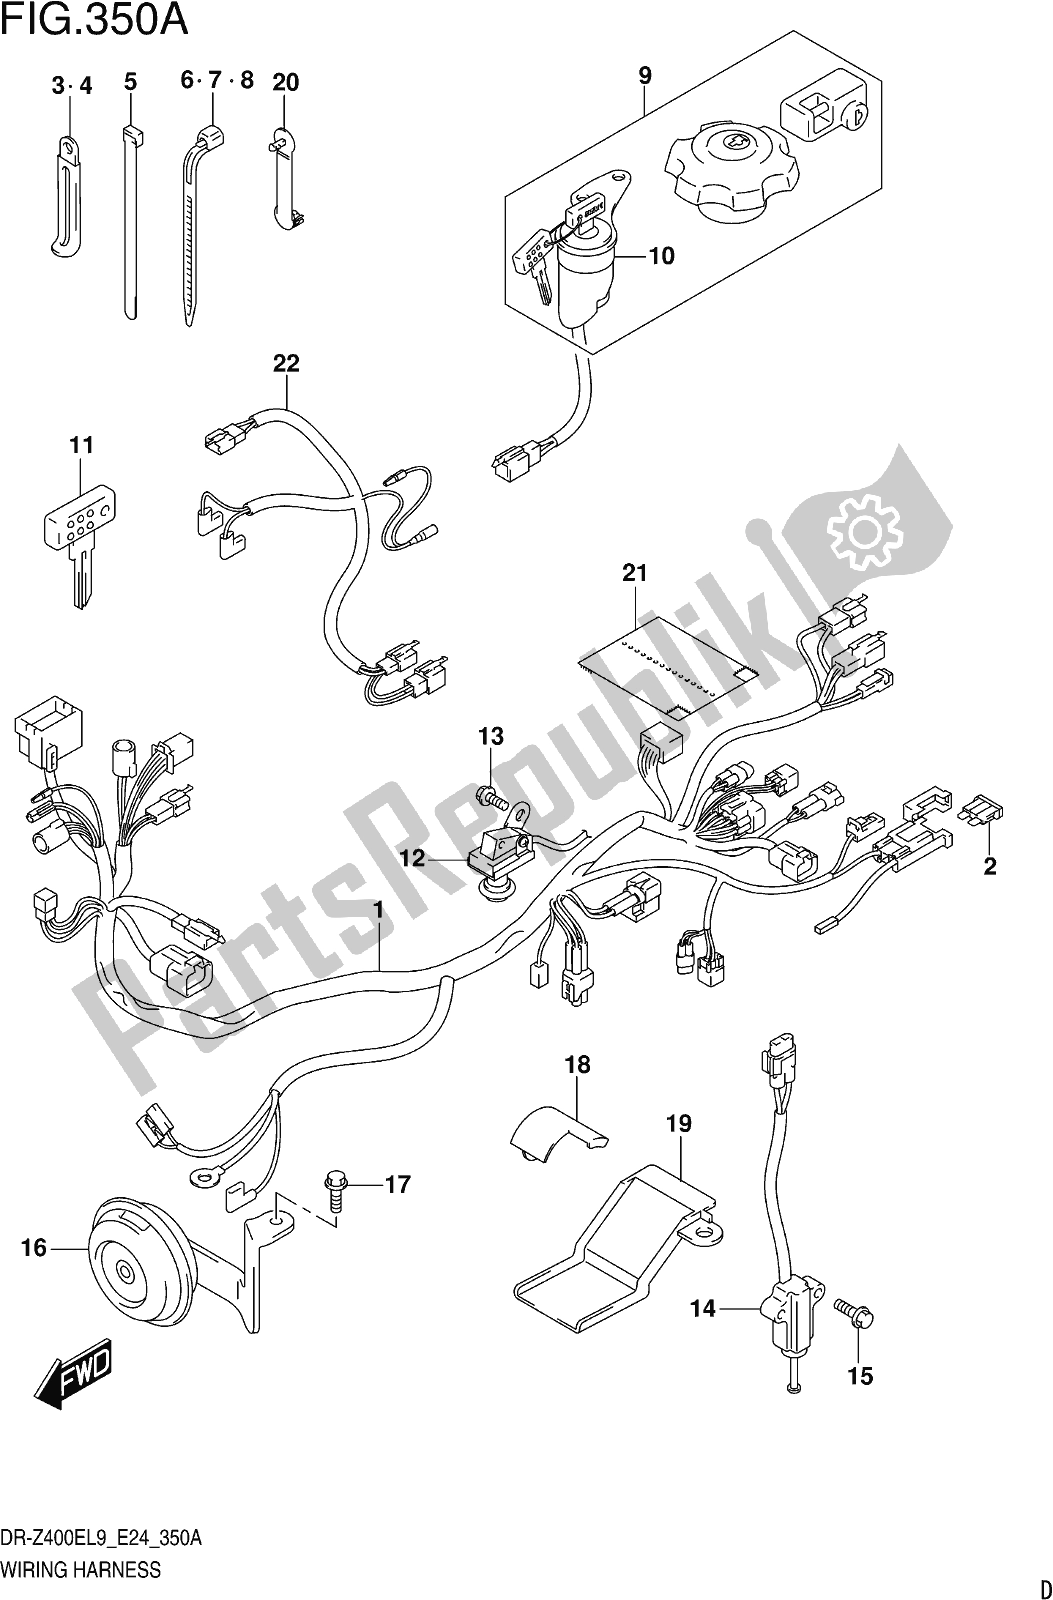 All parts for the Fig. 350a Wiring Harness of the Suzuki DR-Z 400E 2019